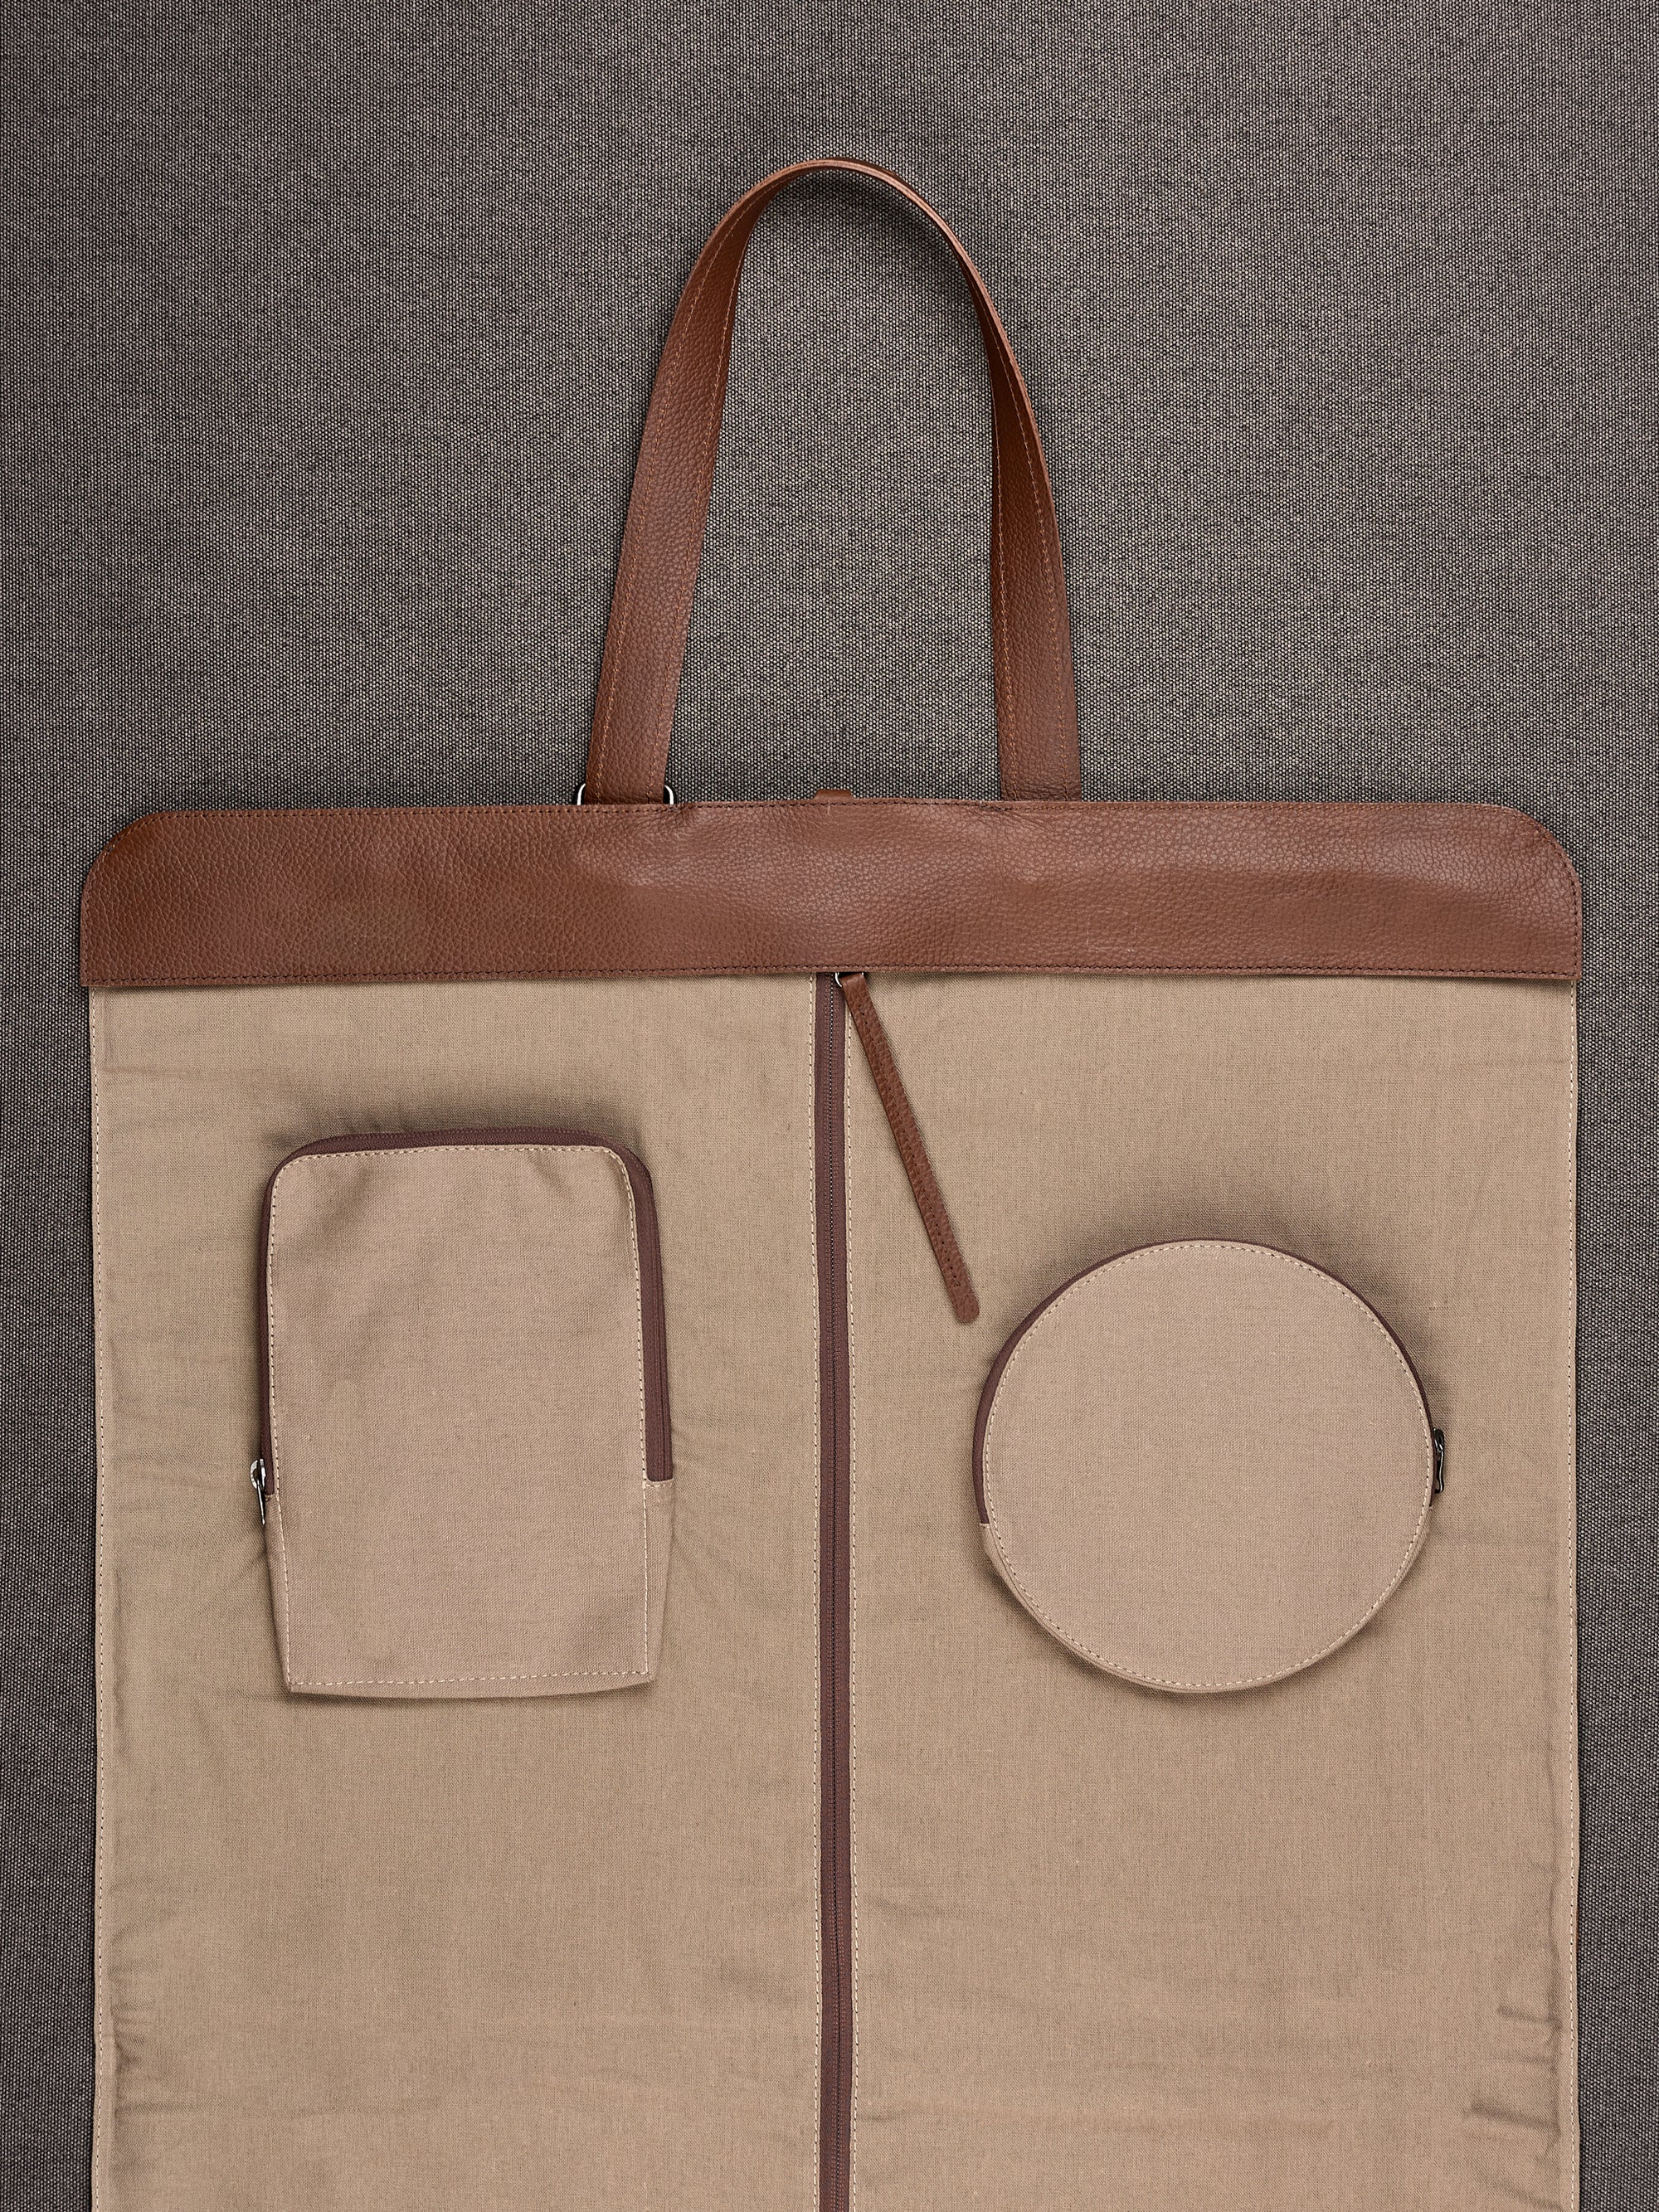 Internal Pockets. Suit Travel Bag Brown by Capra Leather